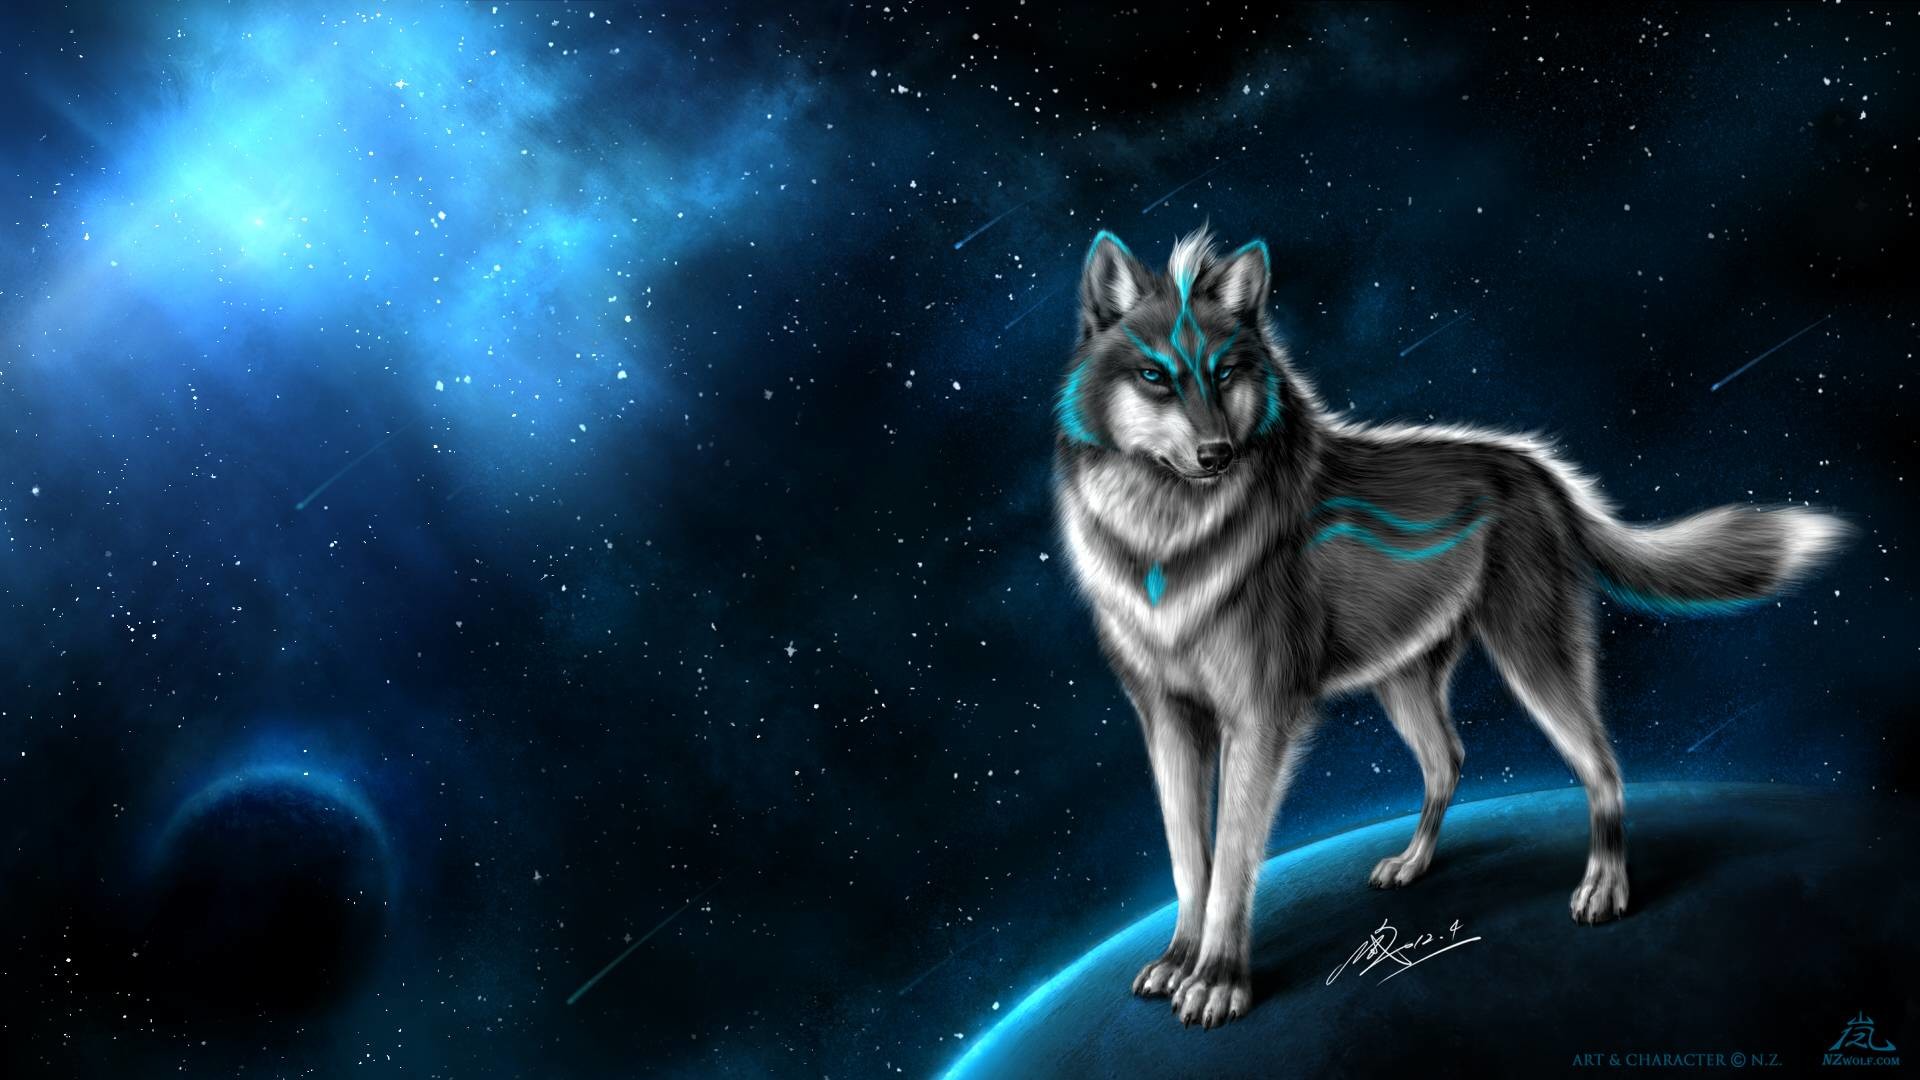 1920x1080 Anime Wolf Wallpapers - Wallpaper Cave Gallery For: Werewolf Wallpapers,  Werewolf Wallpapers, Top 40 HQ .